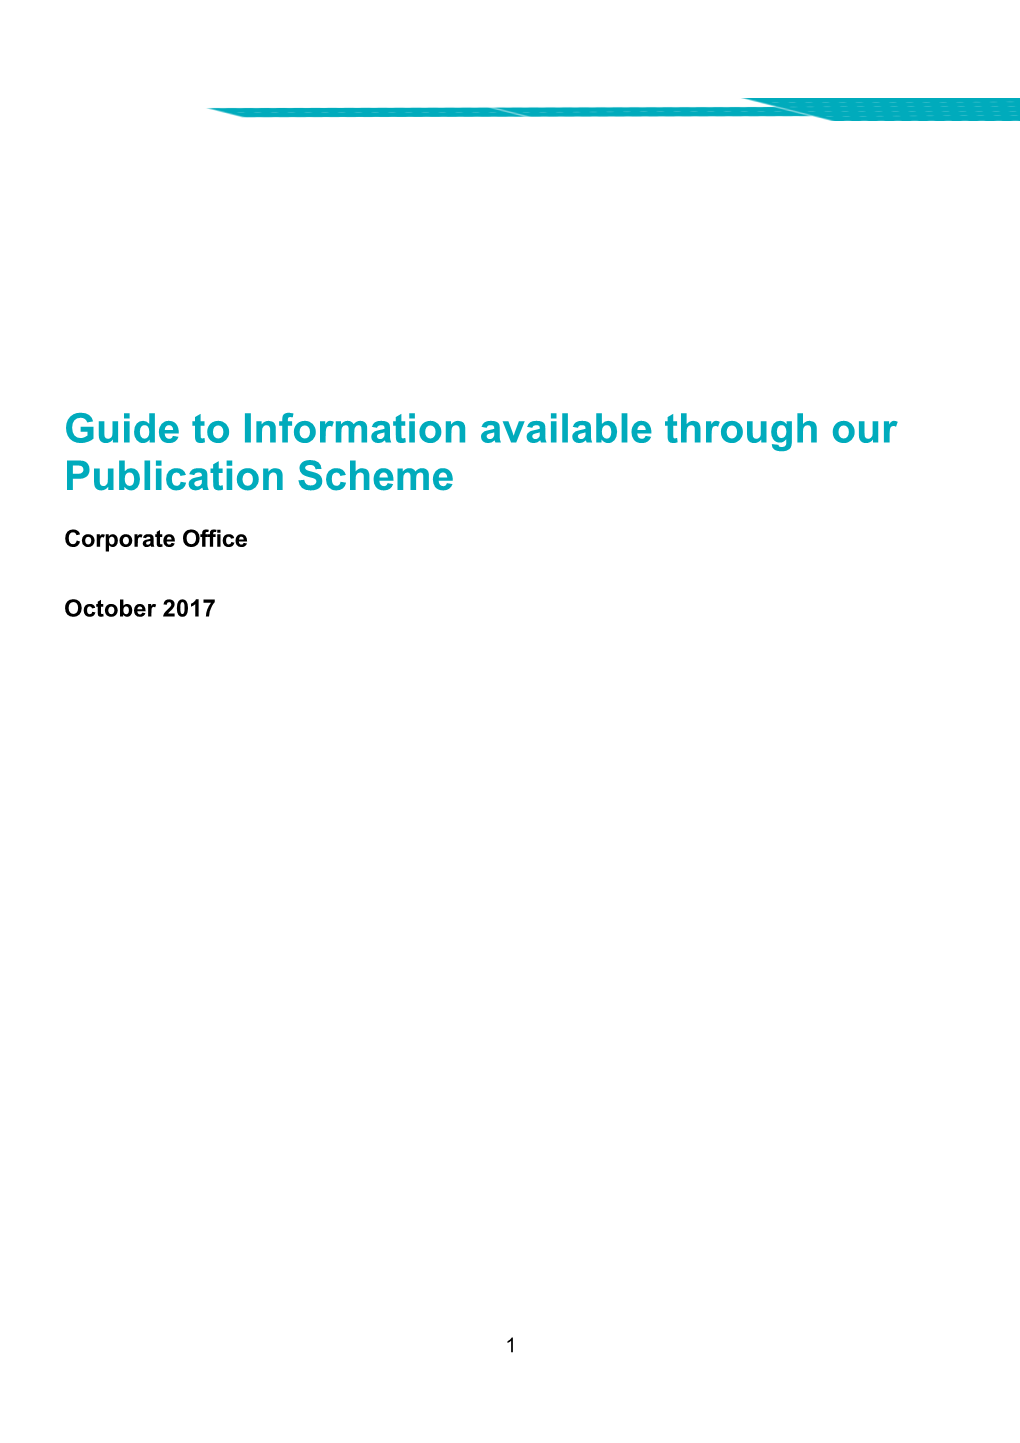 Guide to Information Available Through Our Publication Scheme